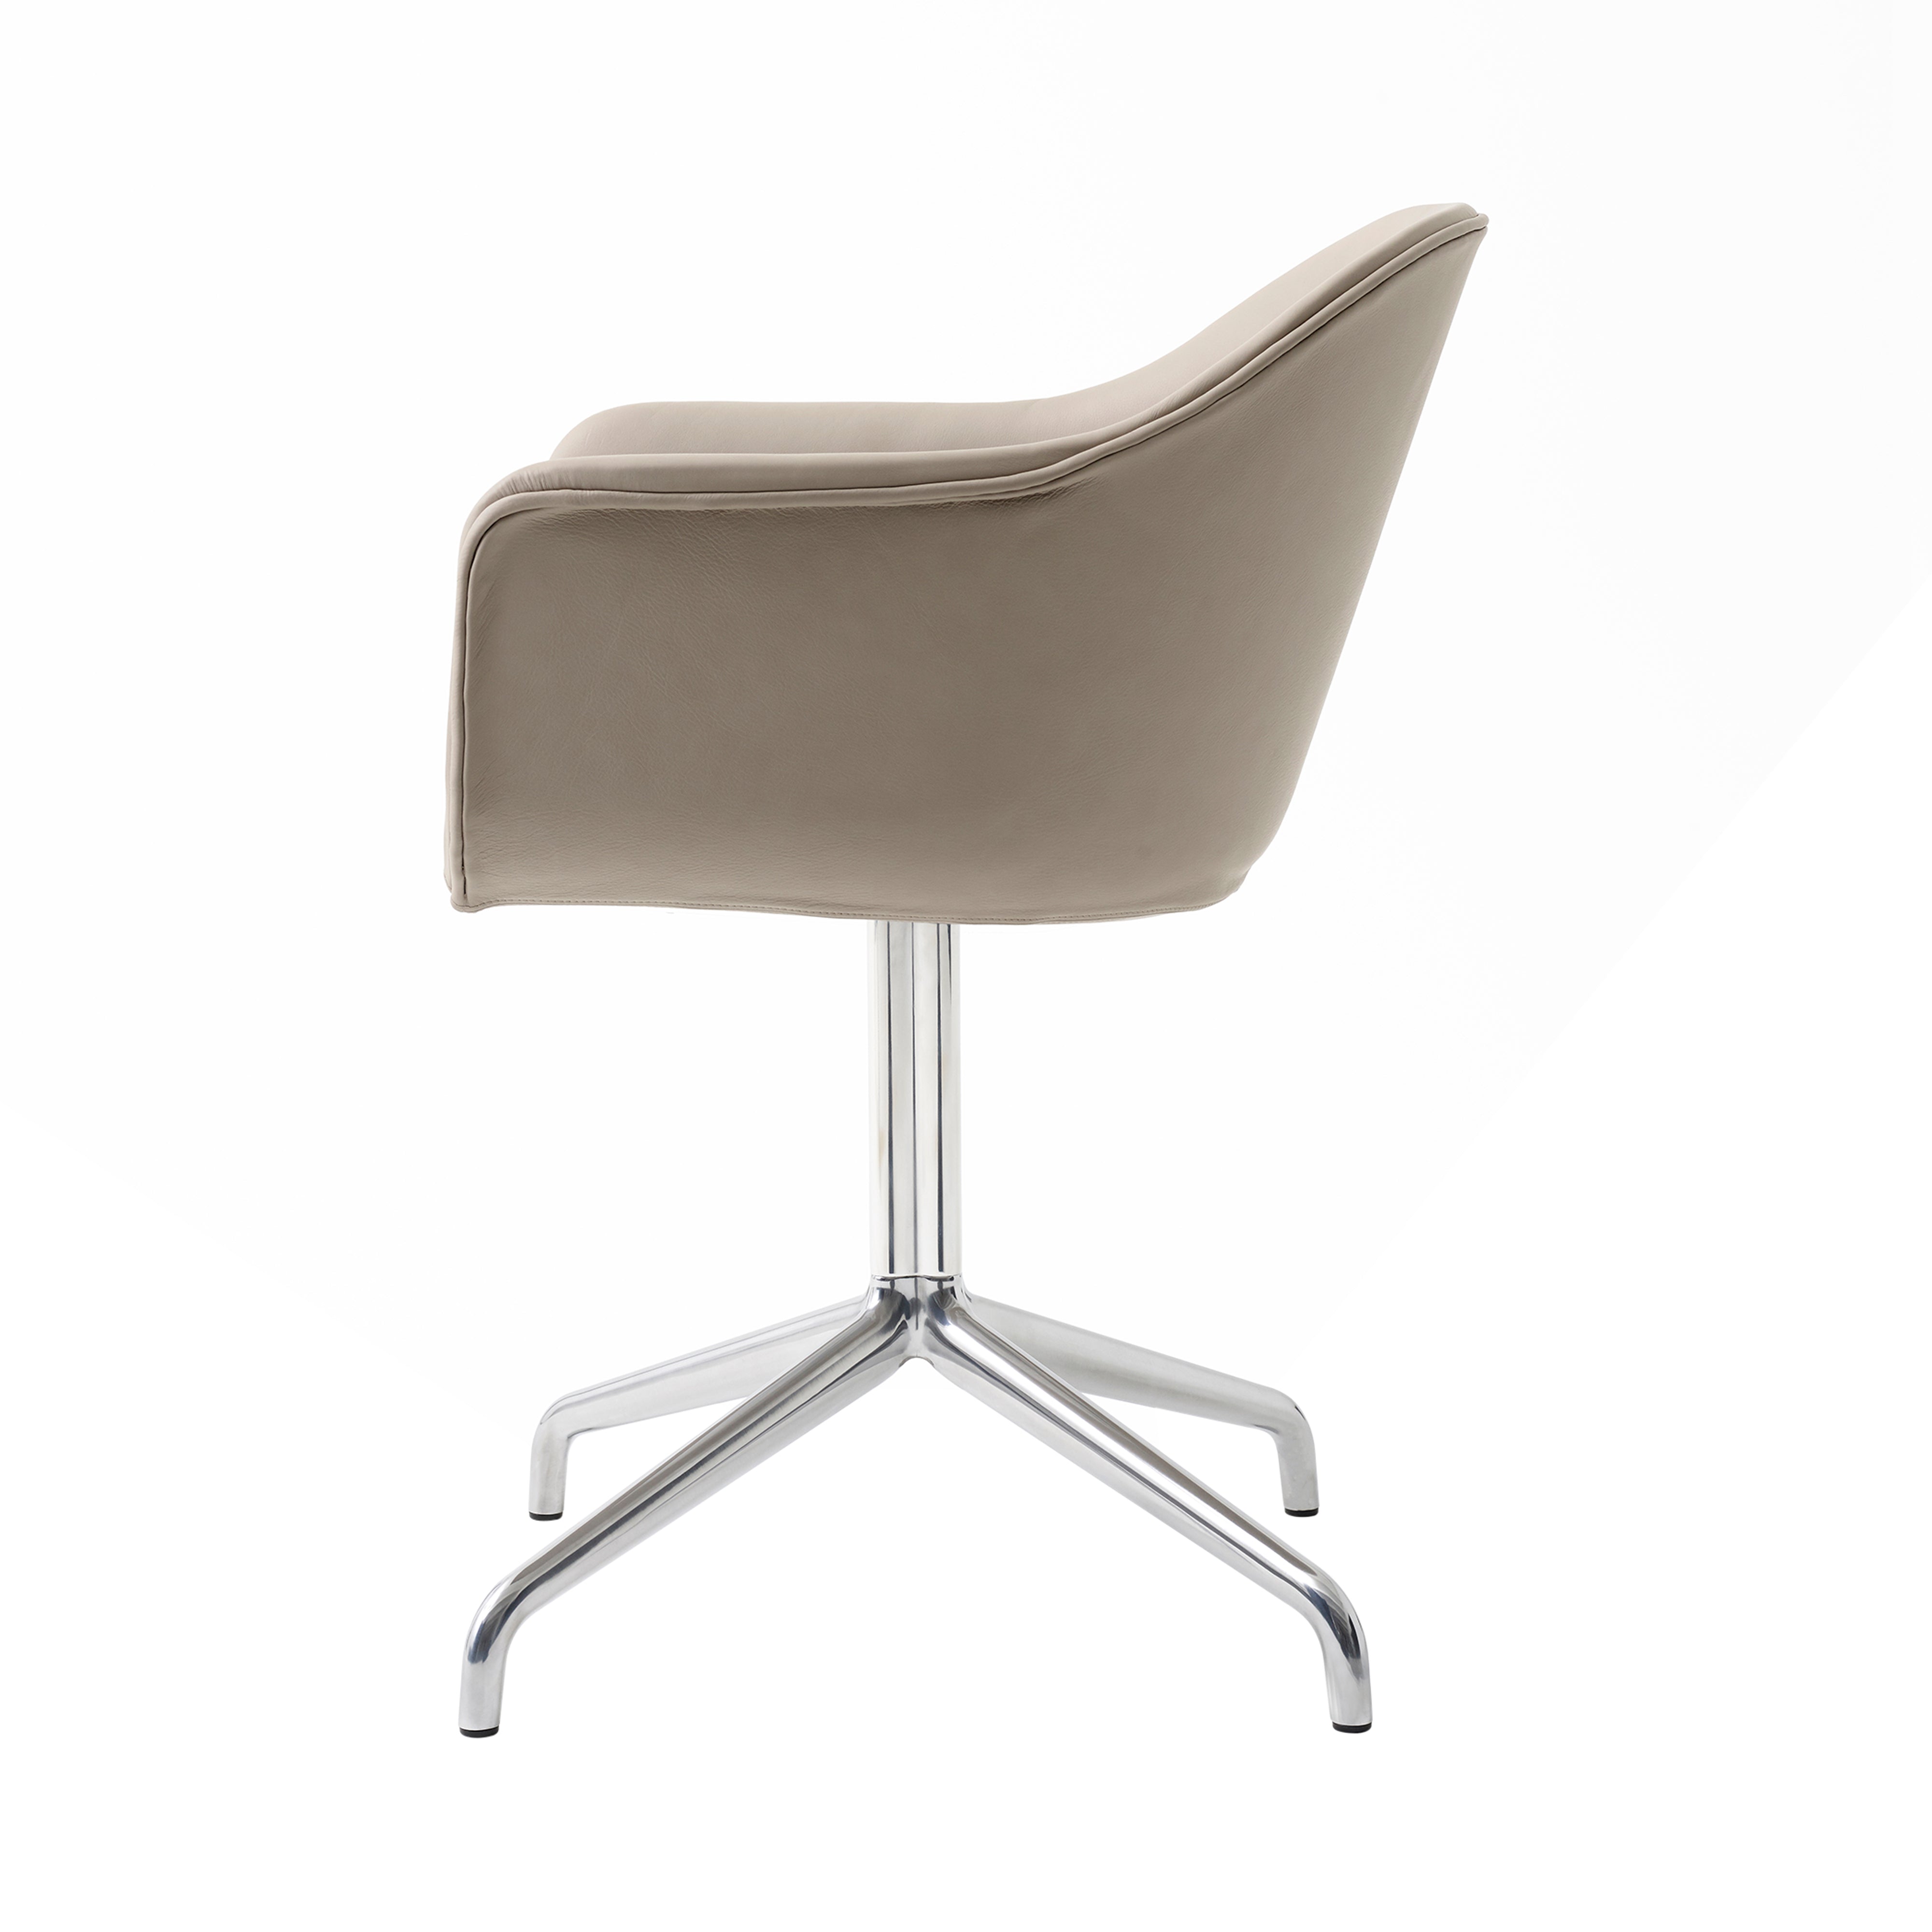 Harbour Dining Chair Star Base: Upholstered + Polished Aluminum